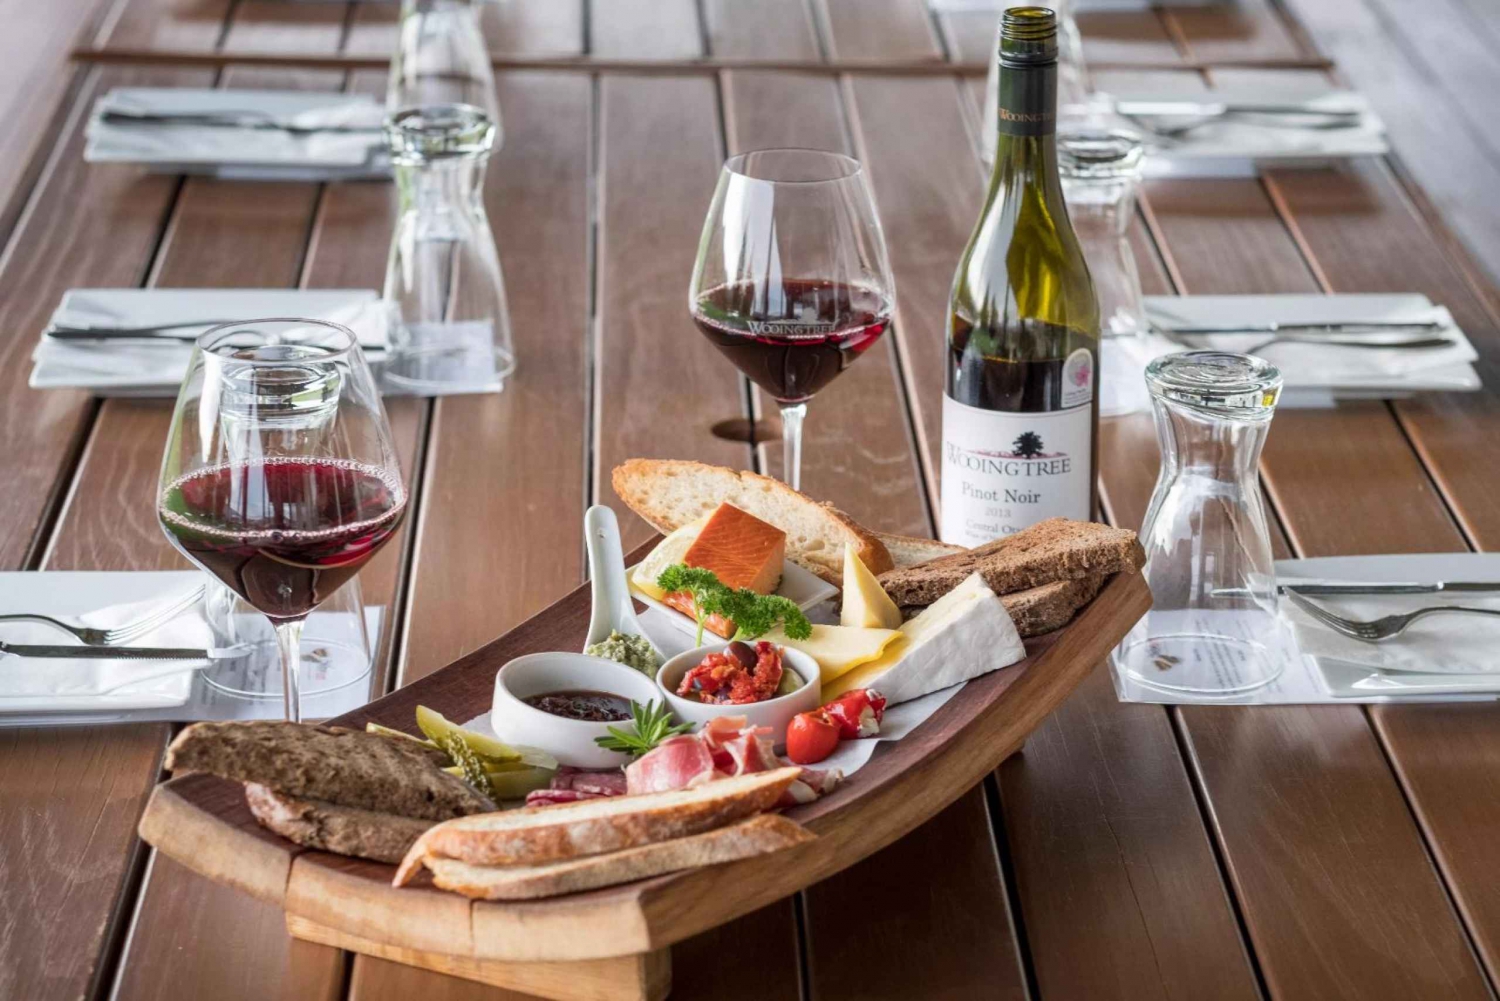 Boutique Winery Half-Day Tour & Vineyard Platter-Style Lunch